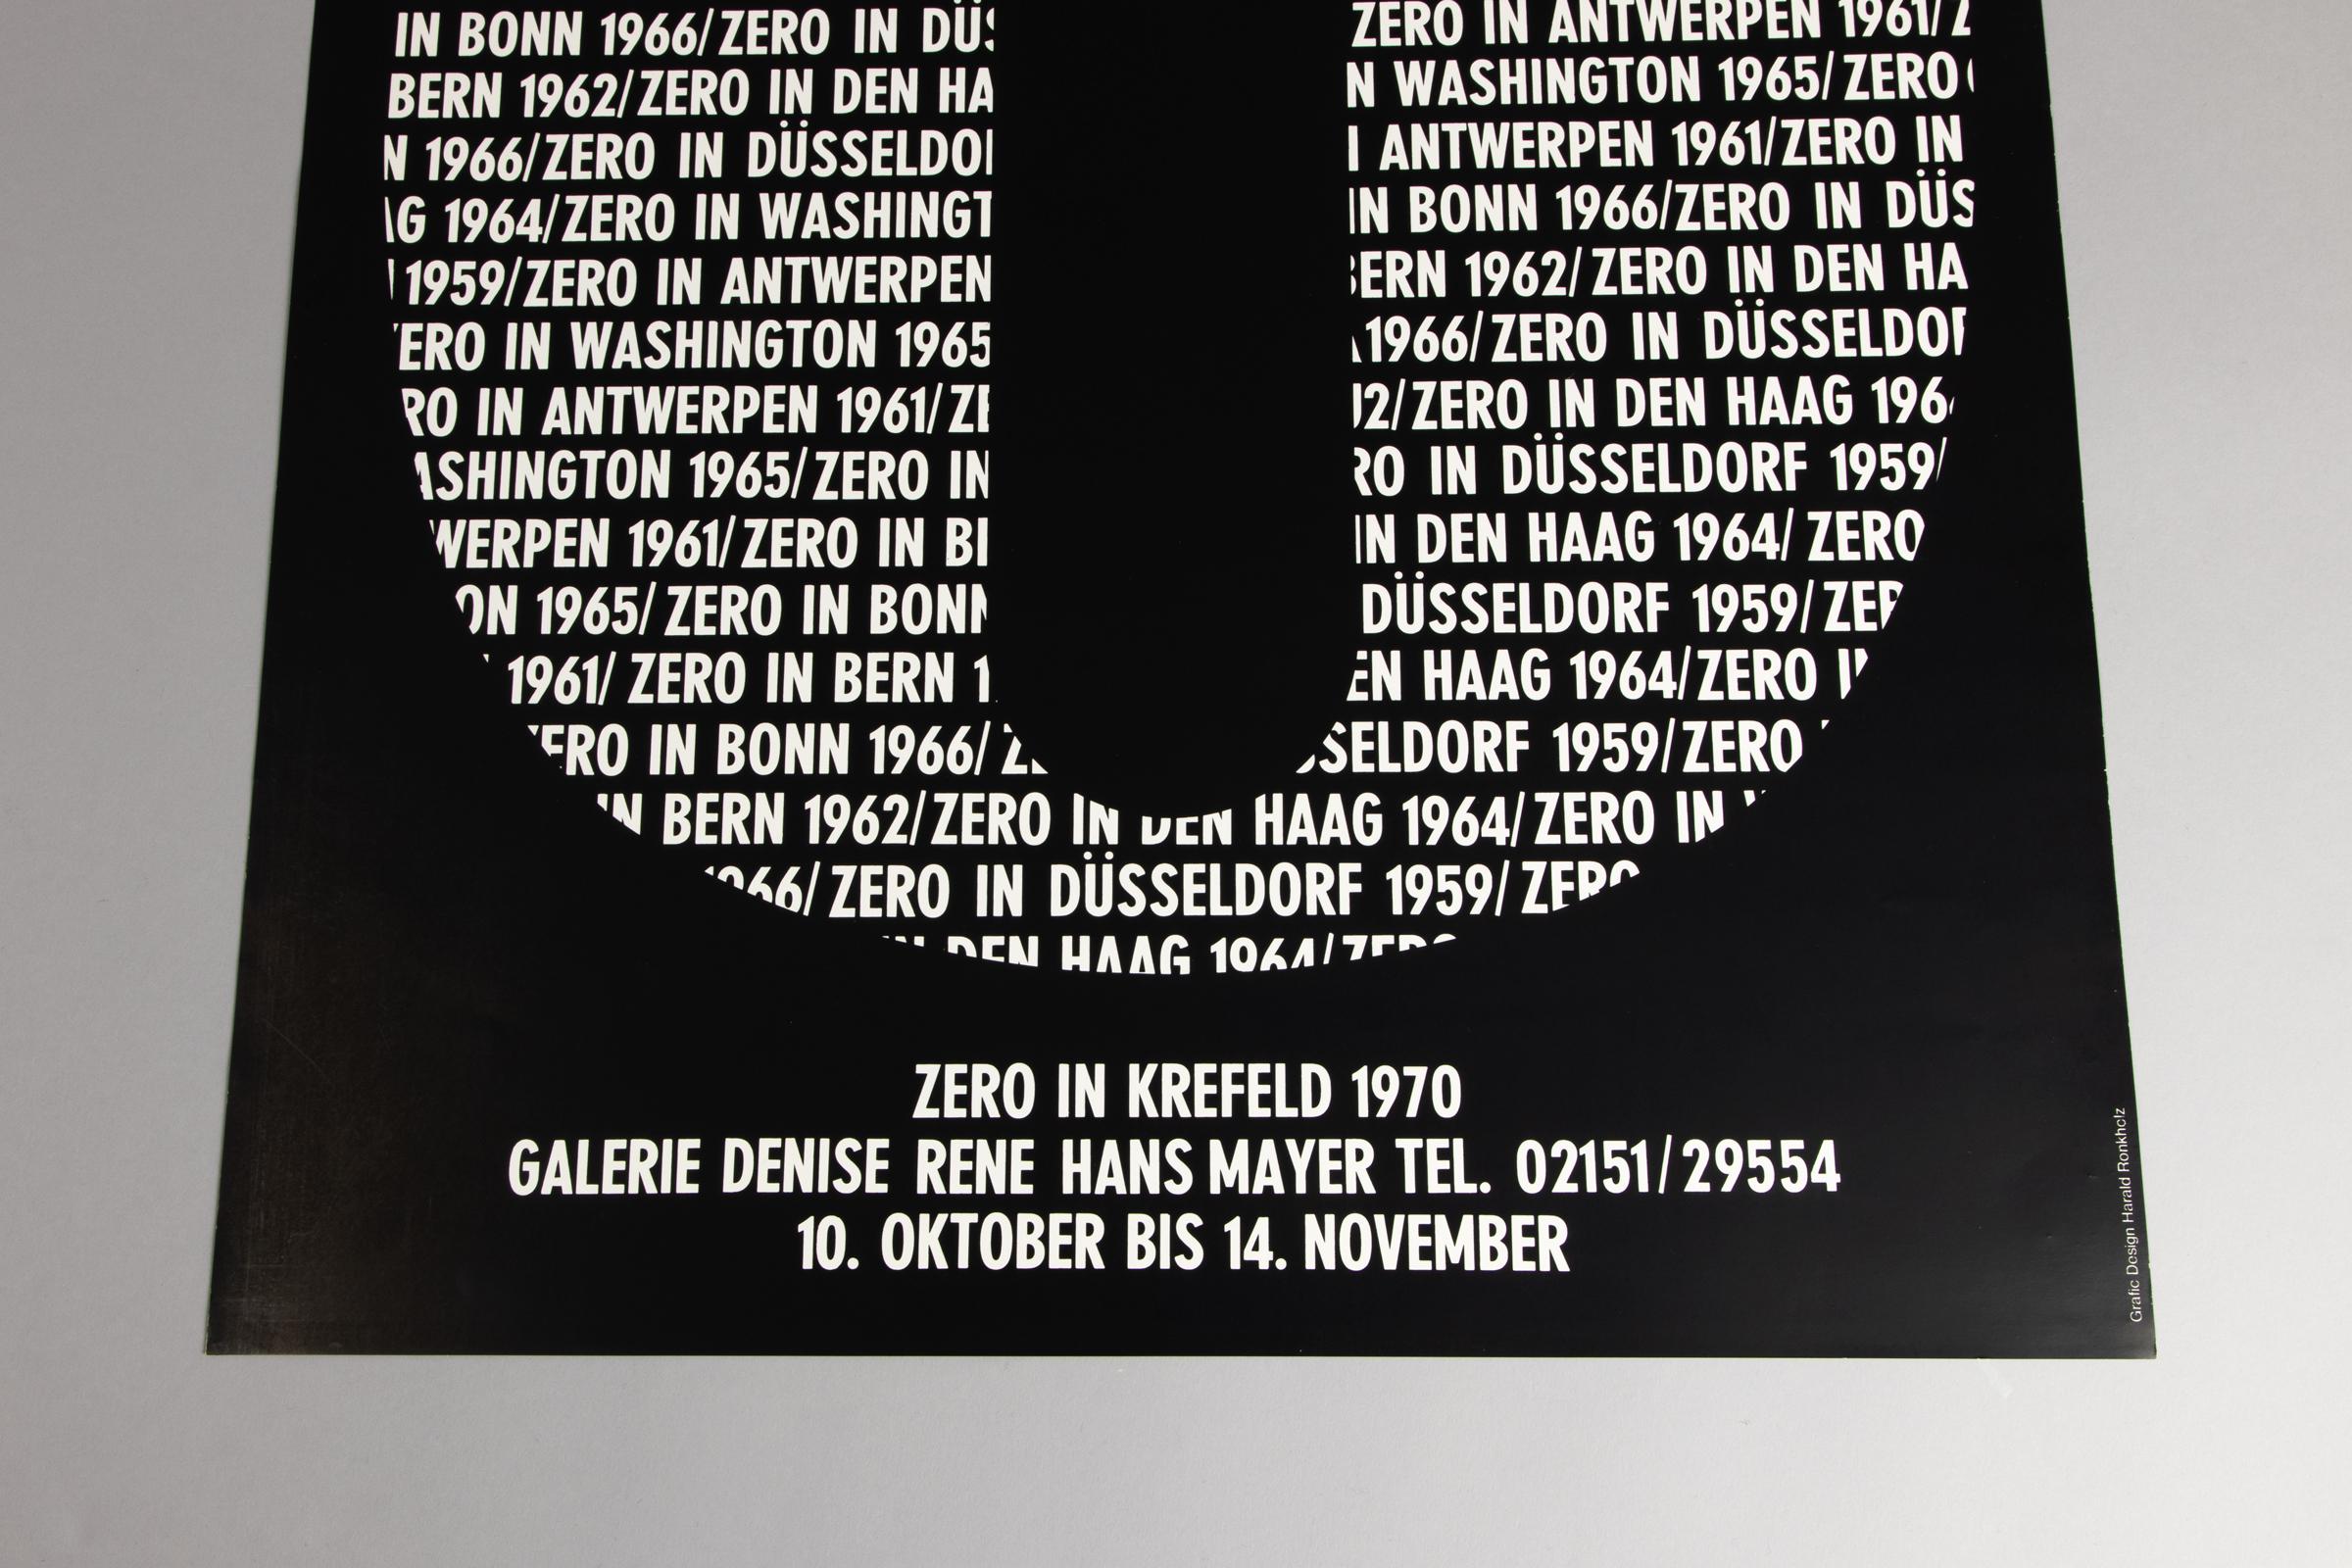 ZERO Gruppe, Original Exhibition Poster, 1970, Galerie Denise Rene Hans Mayer - Abstract Print by Coco Ronkholz